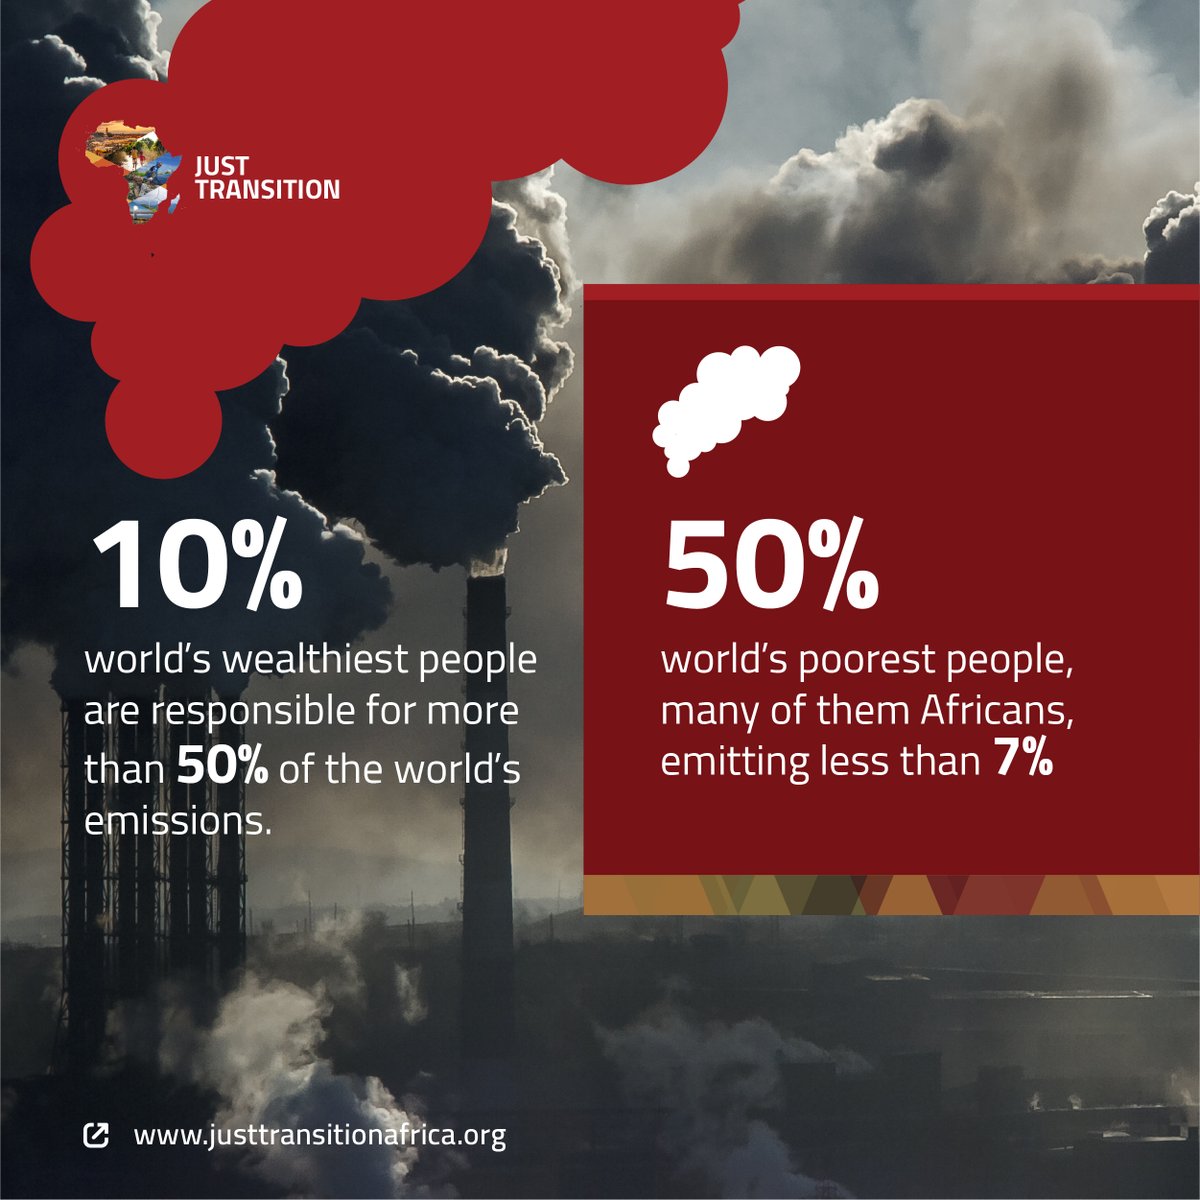 It is time to hold the wealthy accountable for their excessive contributions to global emissions. Their idea of 'development' is unsustainable.
justtransitionafrica.org

#AfricaJustTransition #Africa #ClimateActionNow  #Energy #PanAfrican #GlobalEmissions